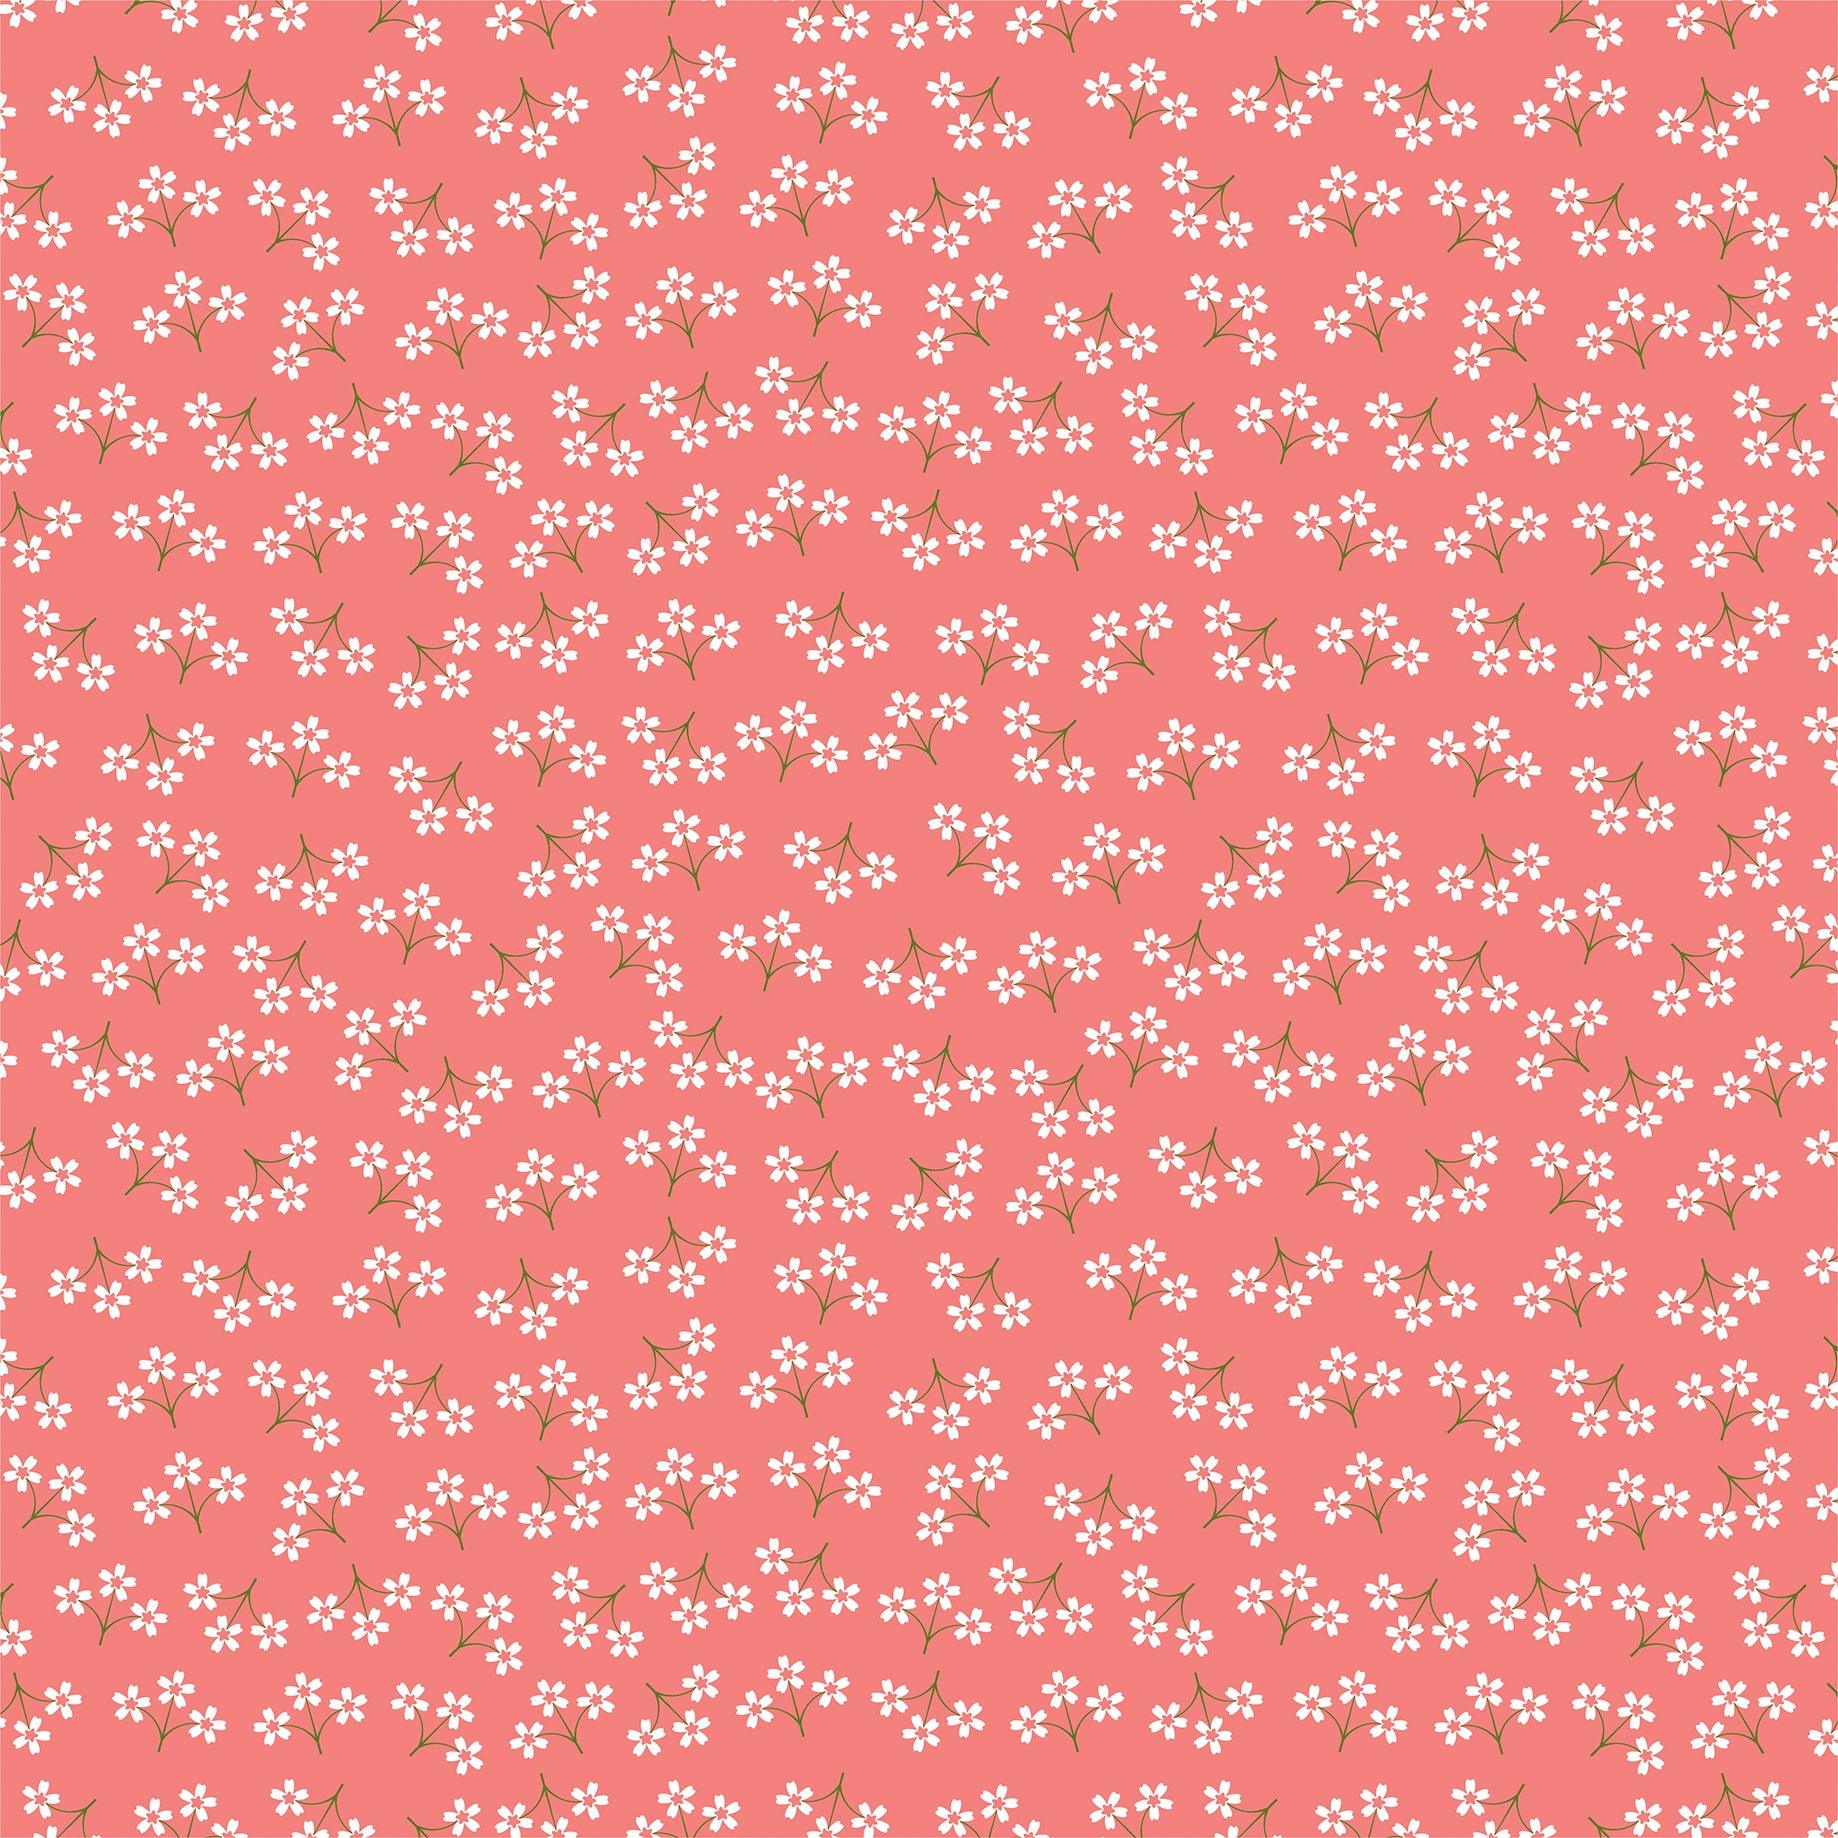 Day In The Life Collection April 12 x 12 Double-Sided Scrapbook Paper by Echo Park Paper - Scrapbook Supply Companies